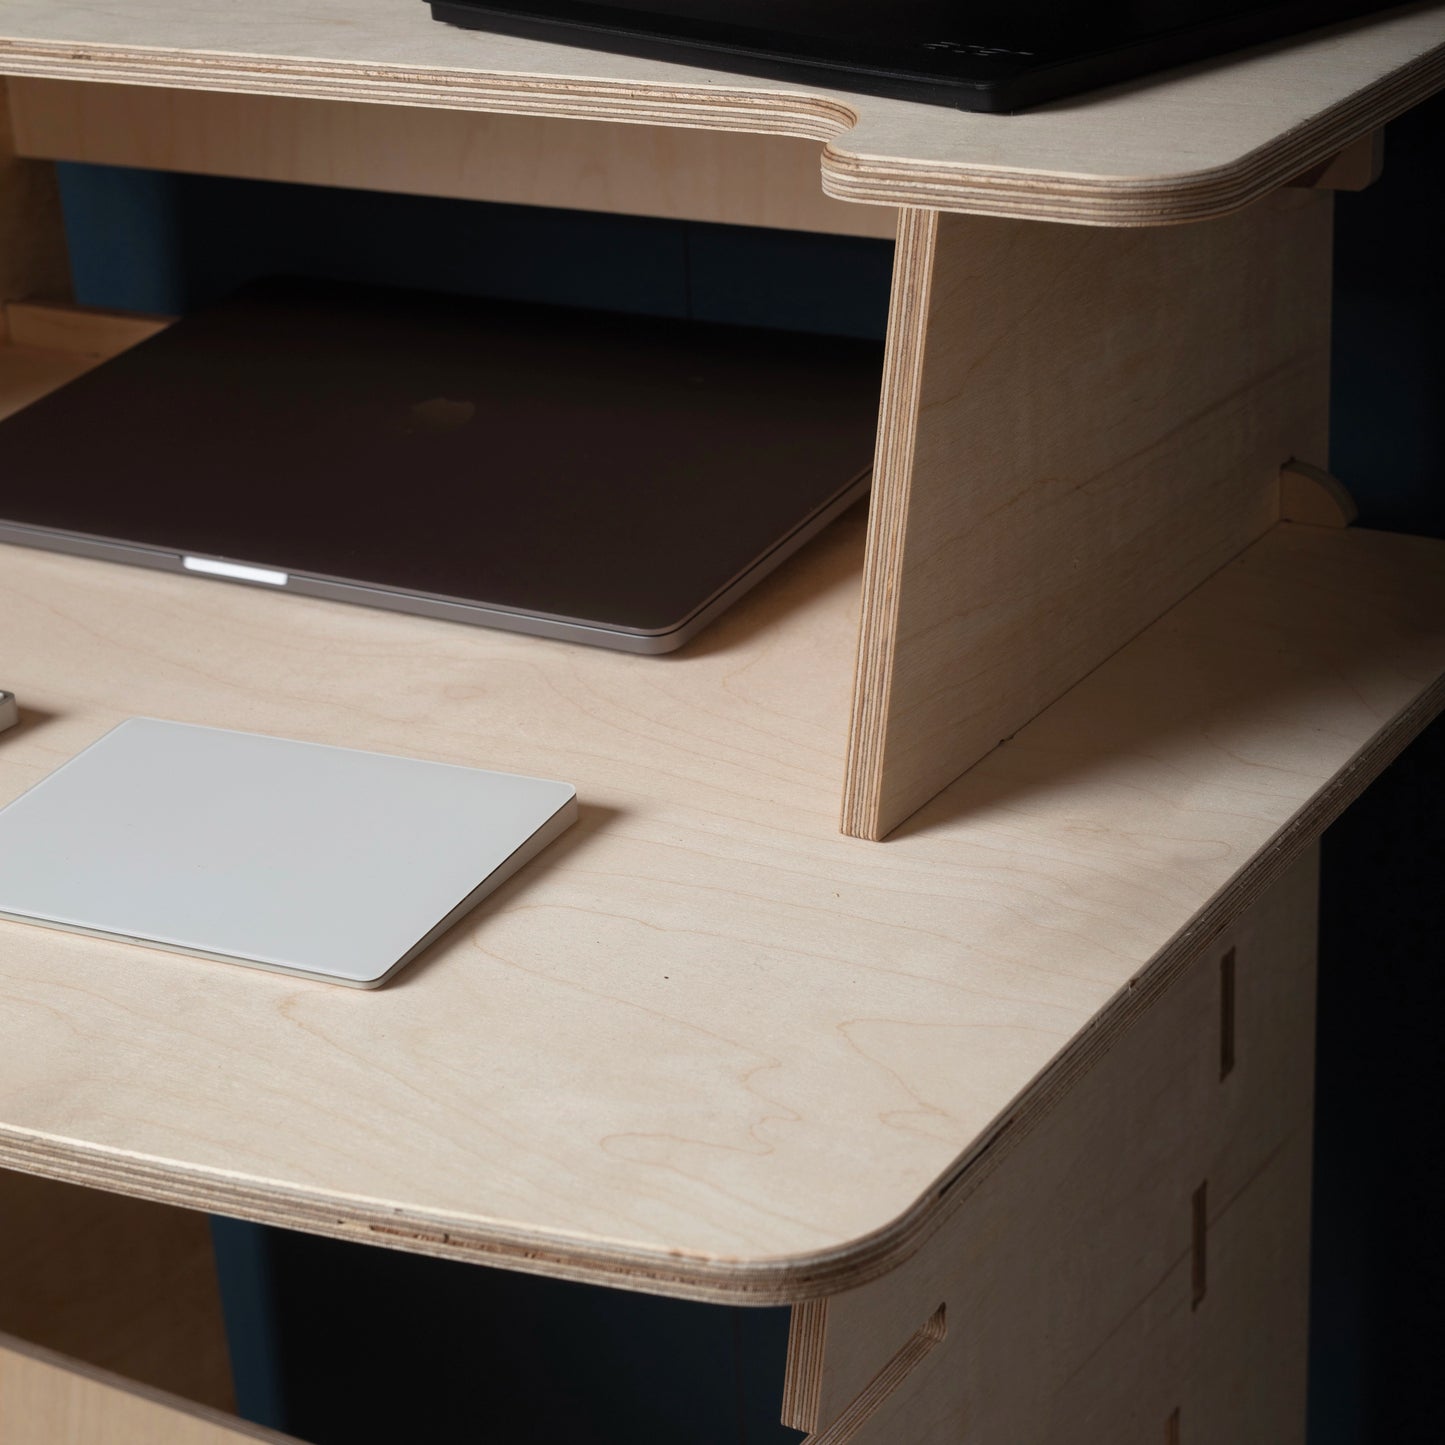 Close up for a two tiered birch plywood stand up desk with a laptop & note pad on desktop against a dark wall